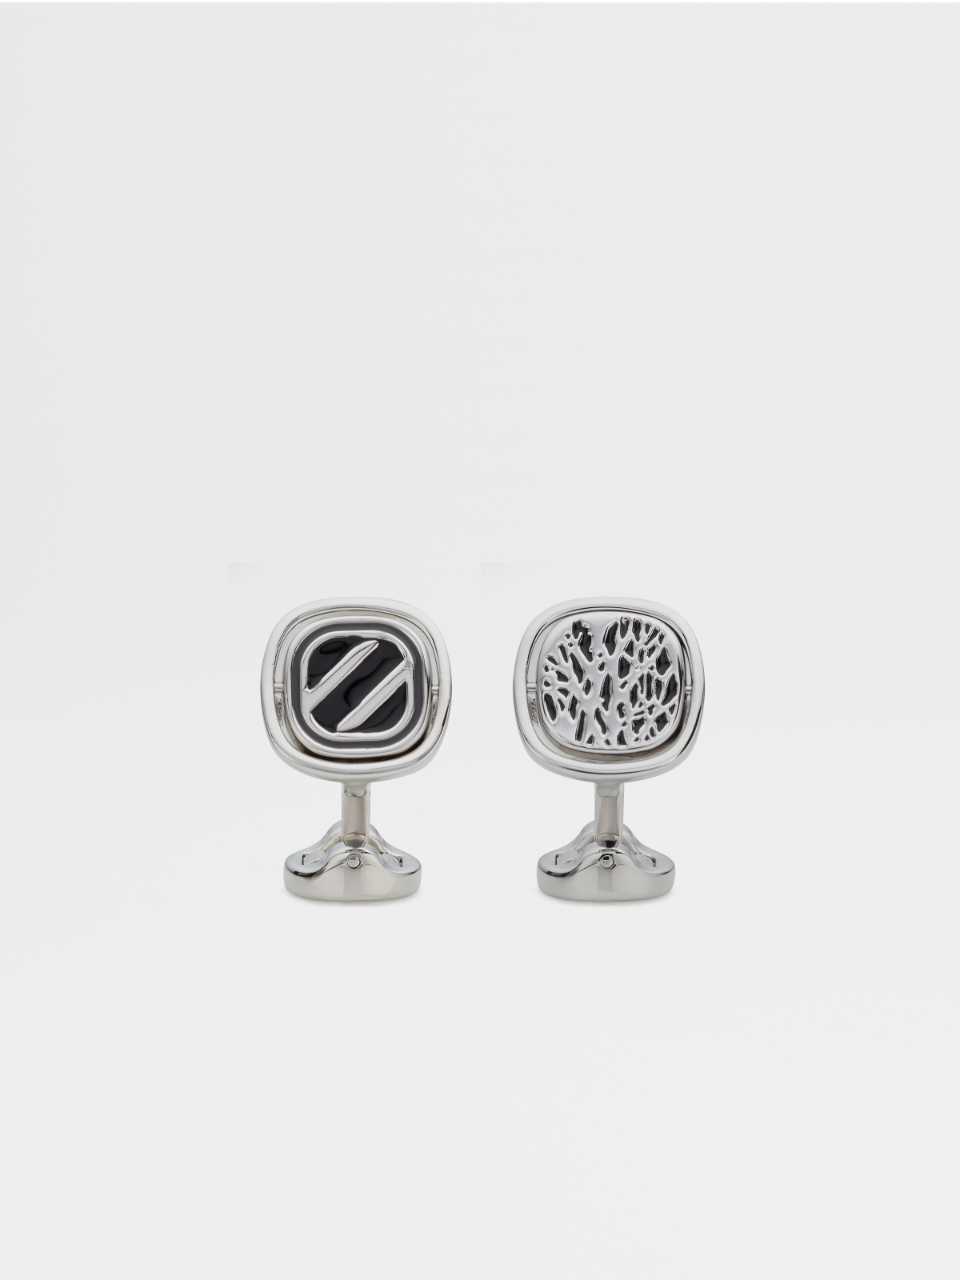 Back to Nature Metal Cufflinks